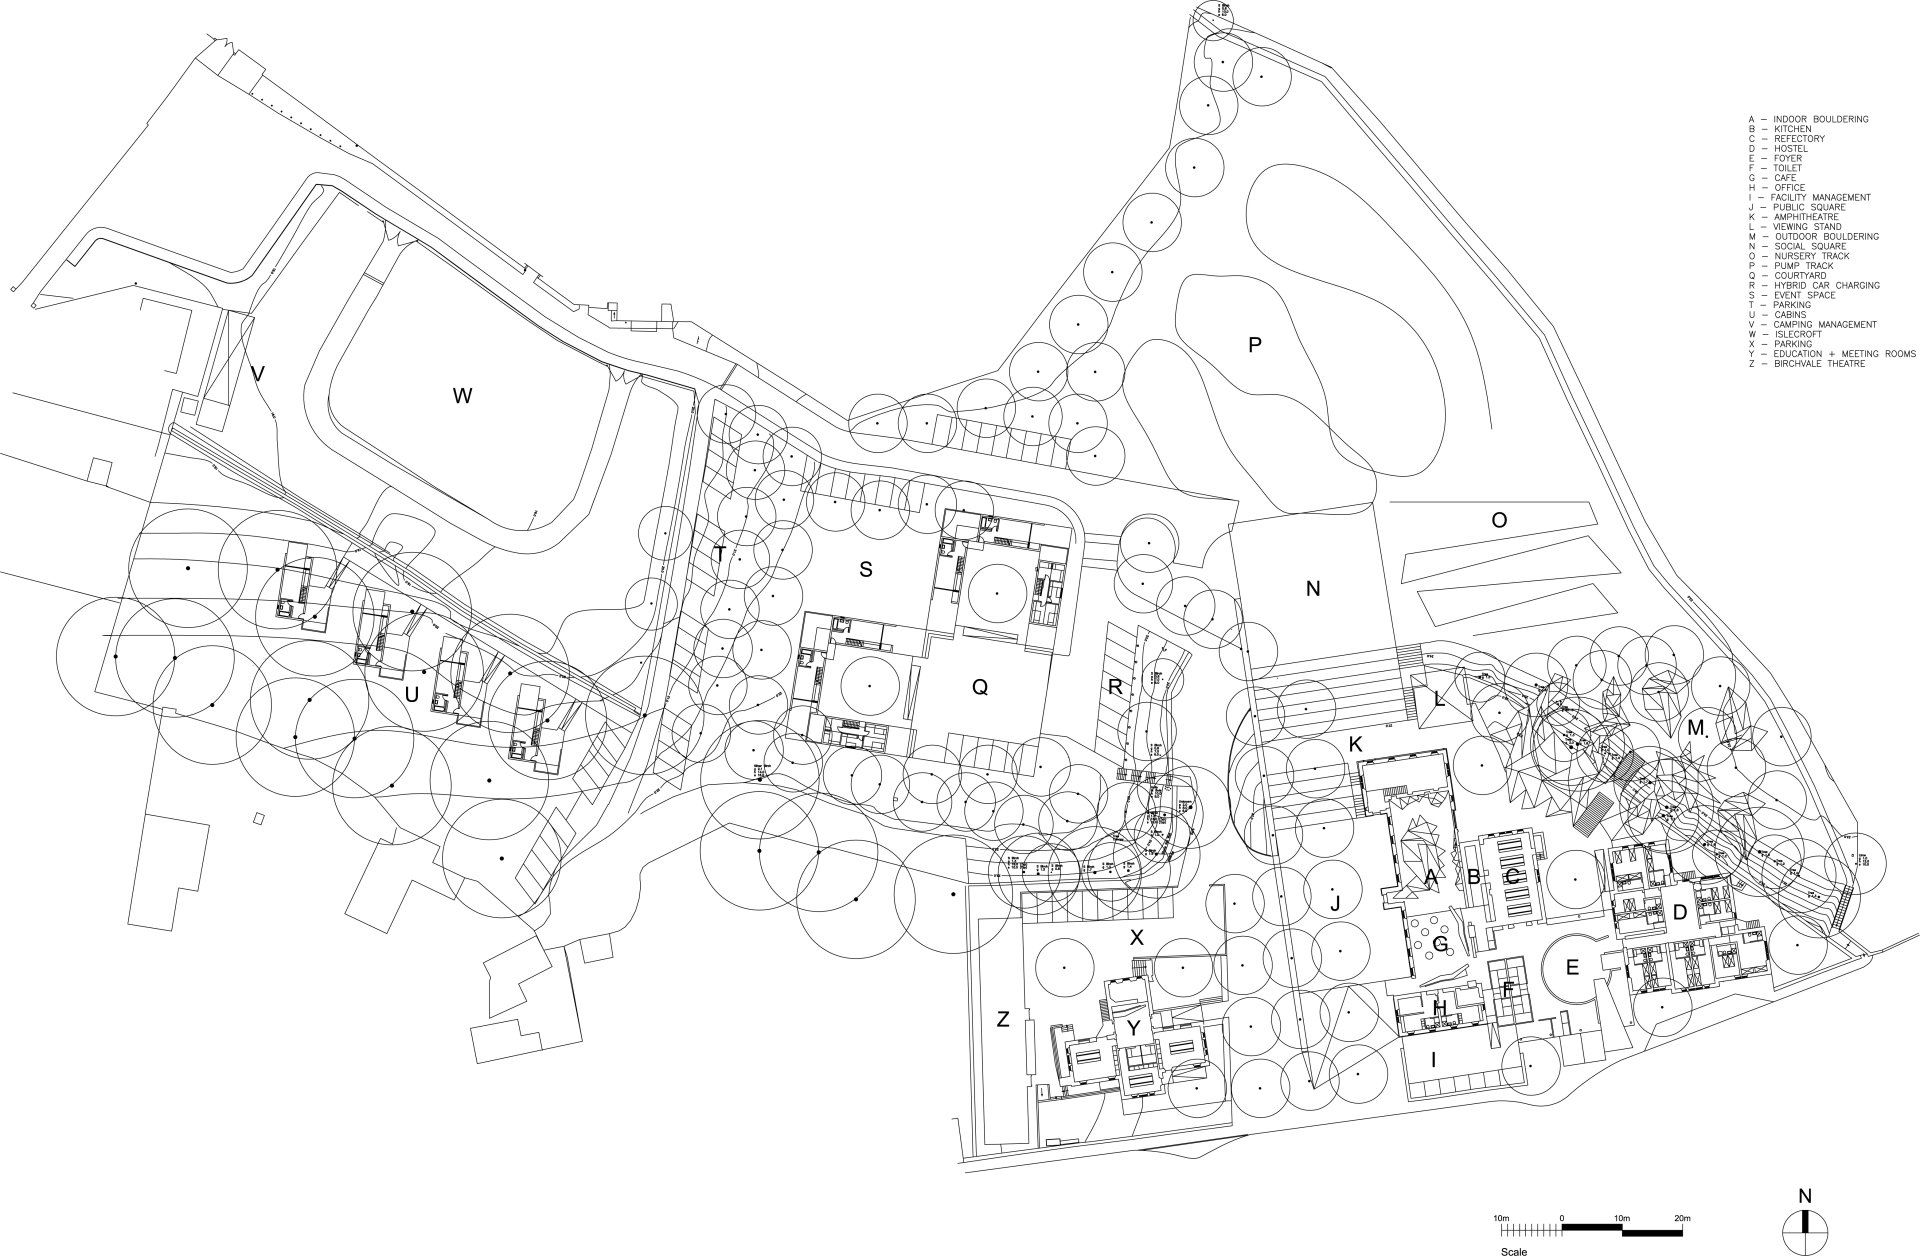 Proposed site plan for the Dalbeattie Rocks and Wheels project